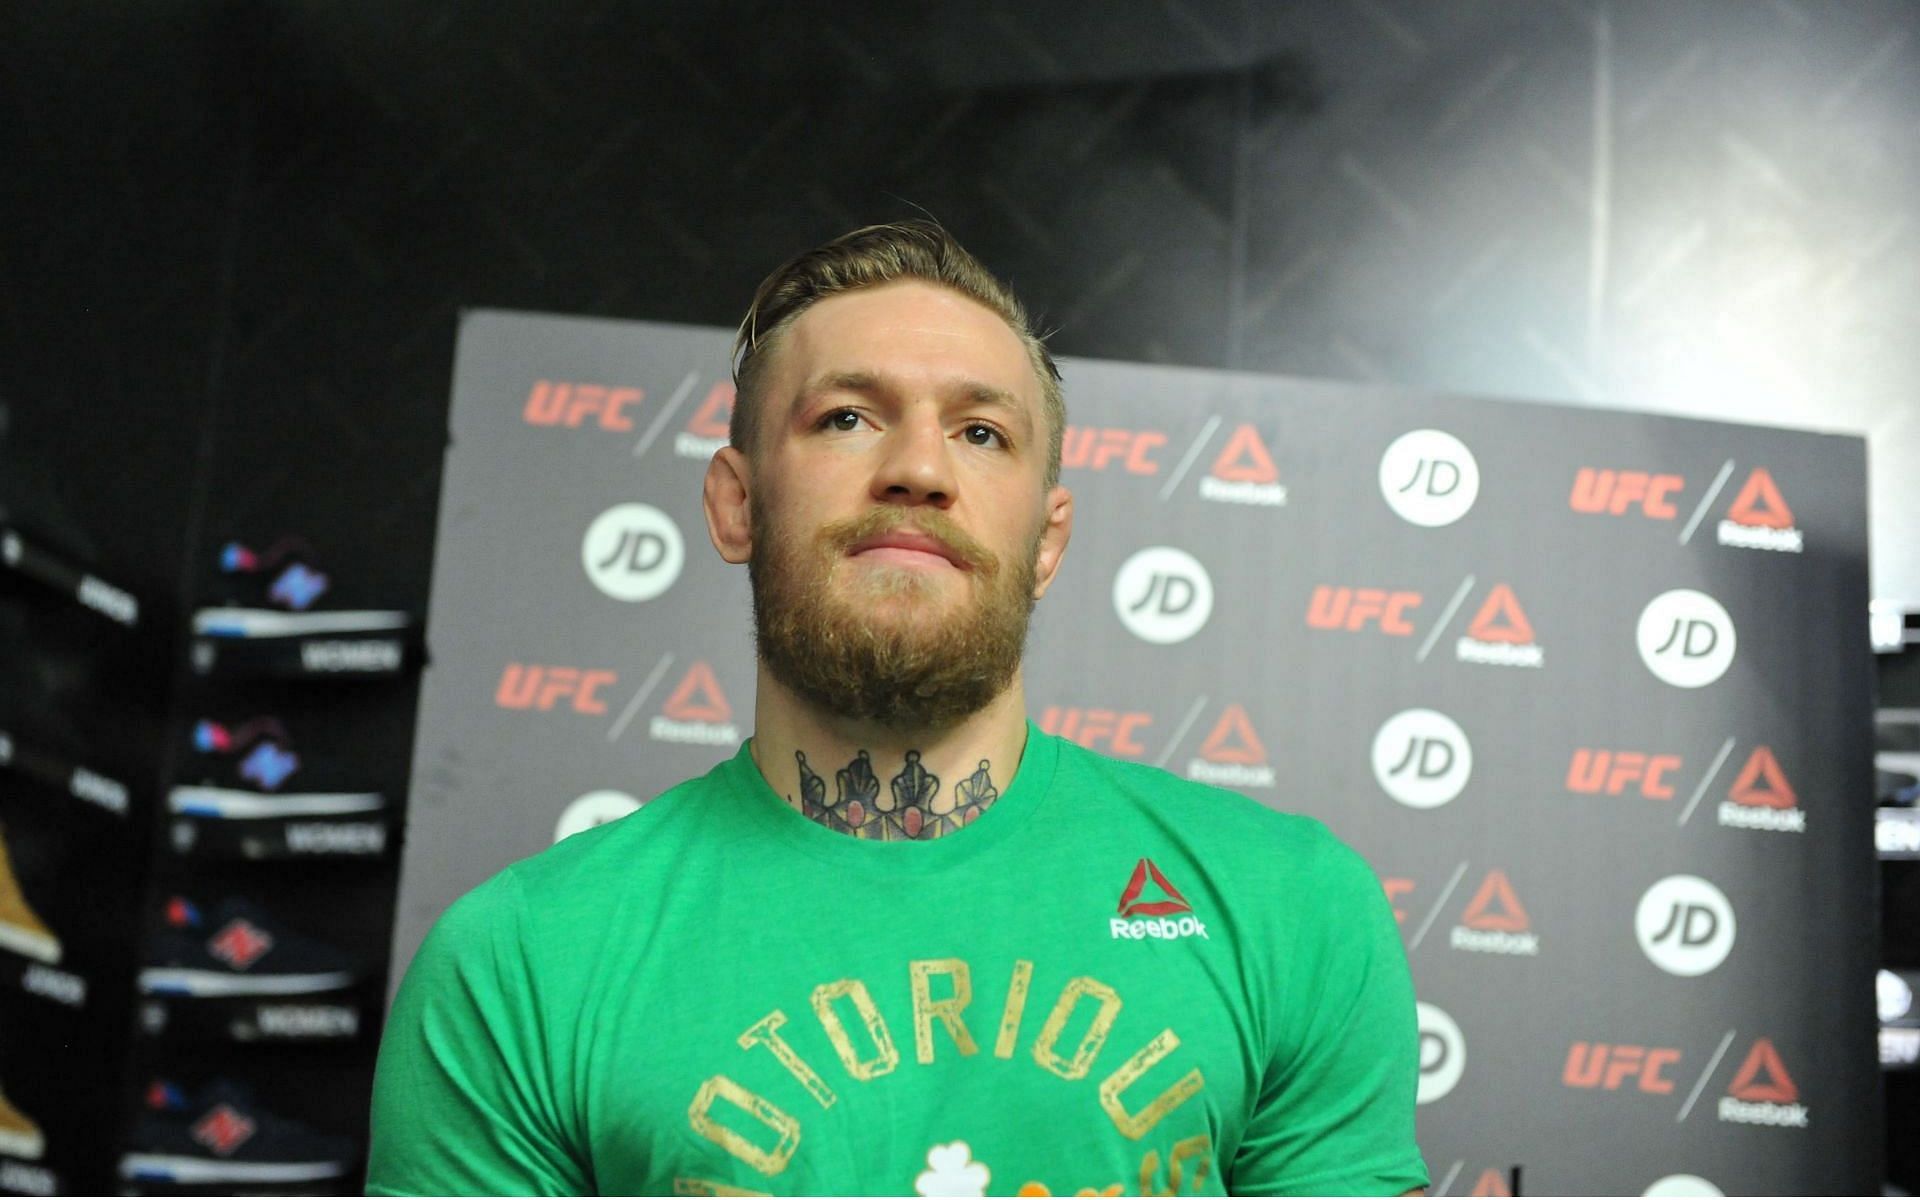 Watch: Conor McGregor reacts to the news that Jose Aldo is out of their UFC 189 showdown back in 2015